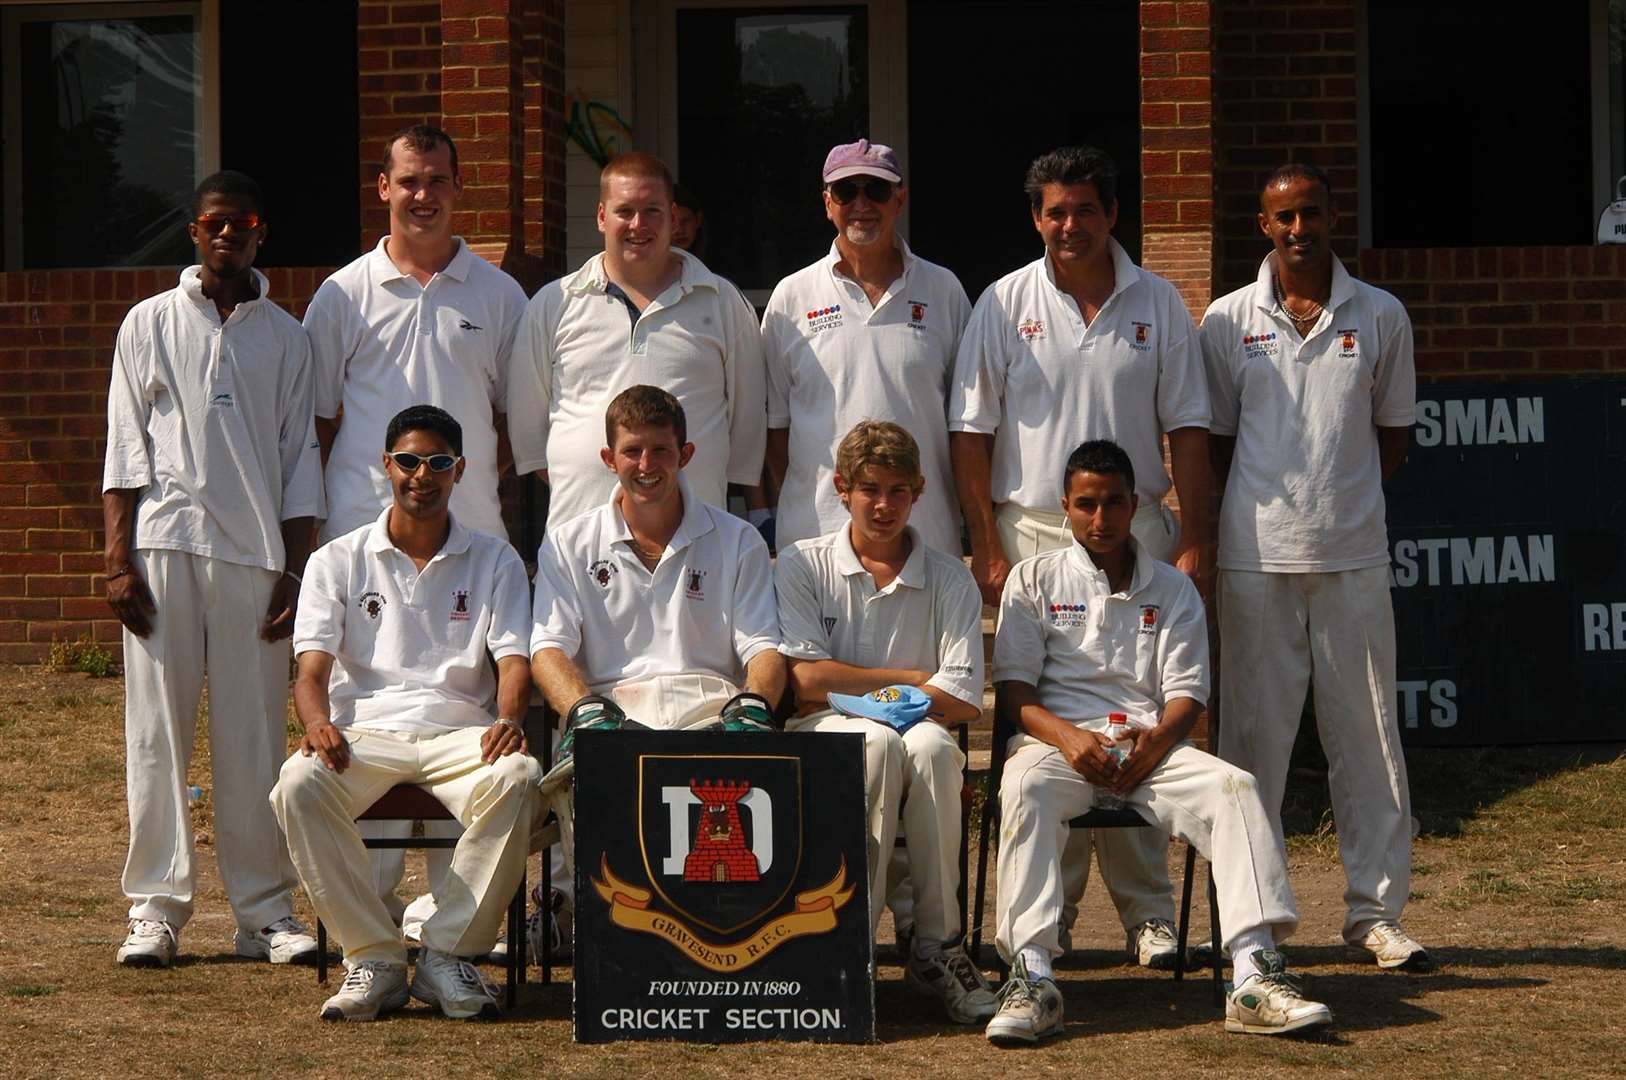 The Gravesend RF Cricket team pictured on the day of the record-breaking temperature on Sunday, August 10, 2003